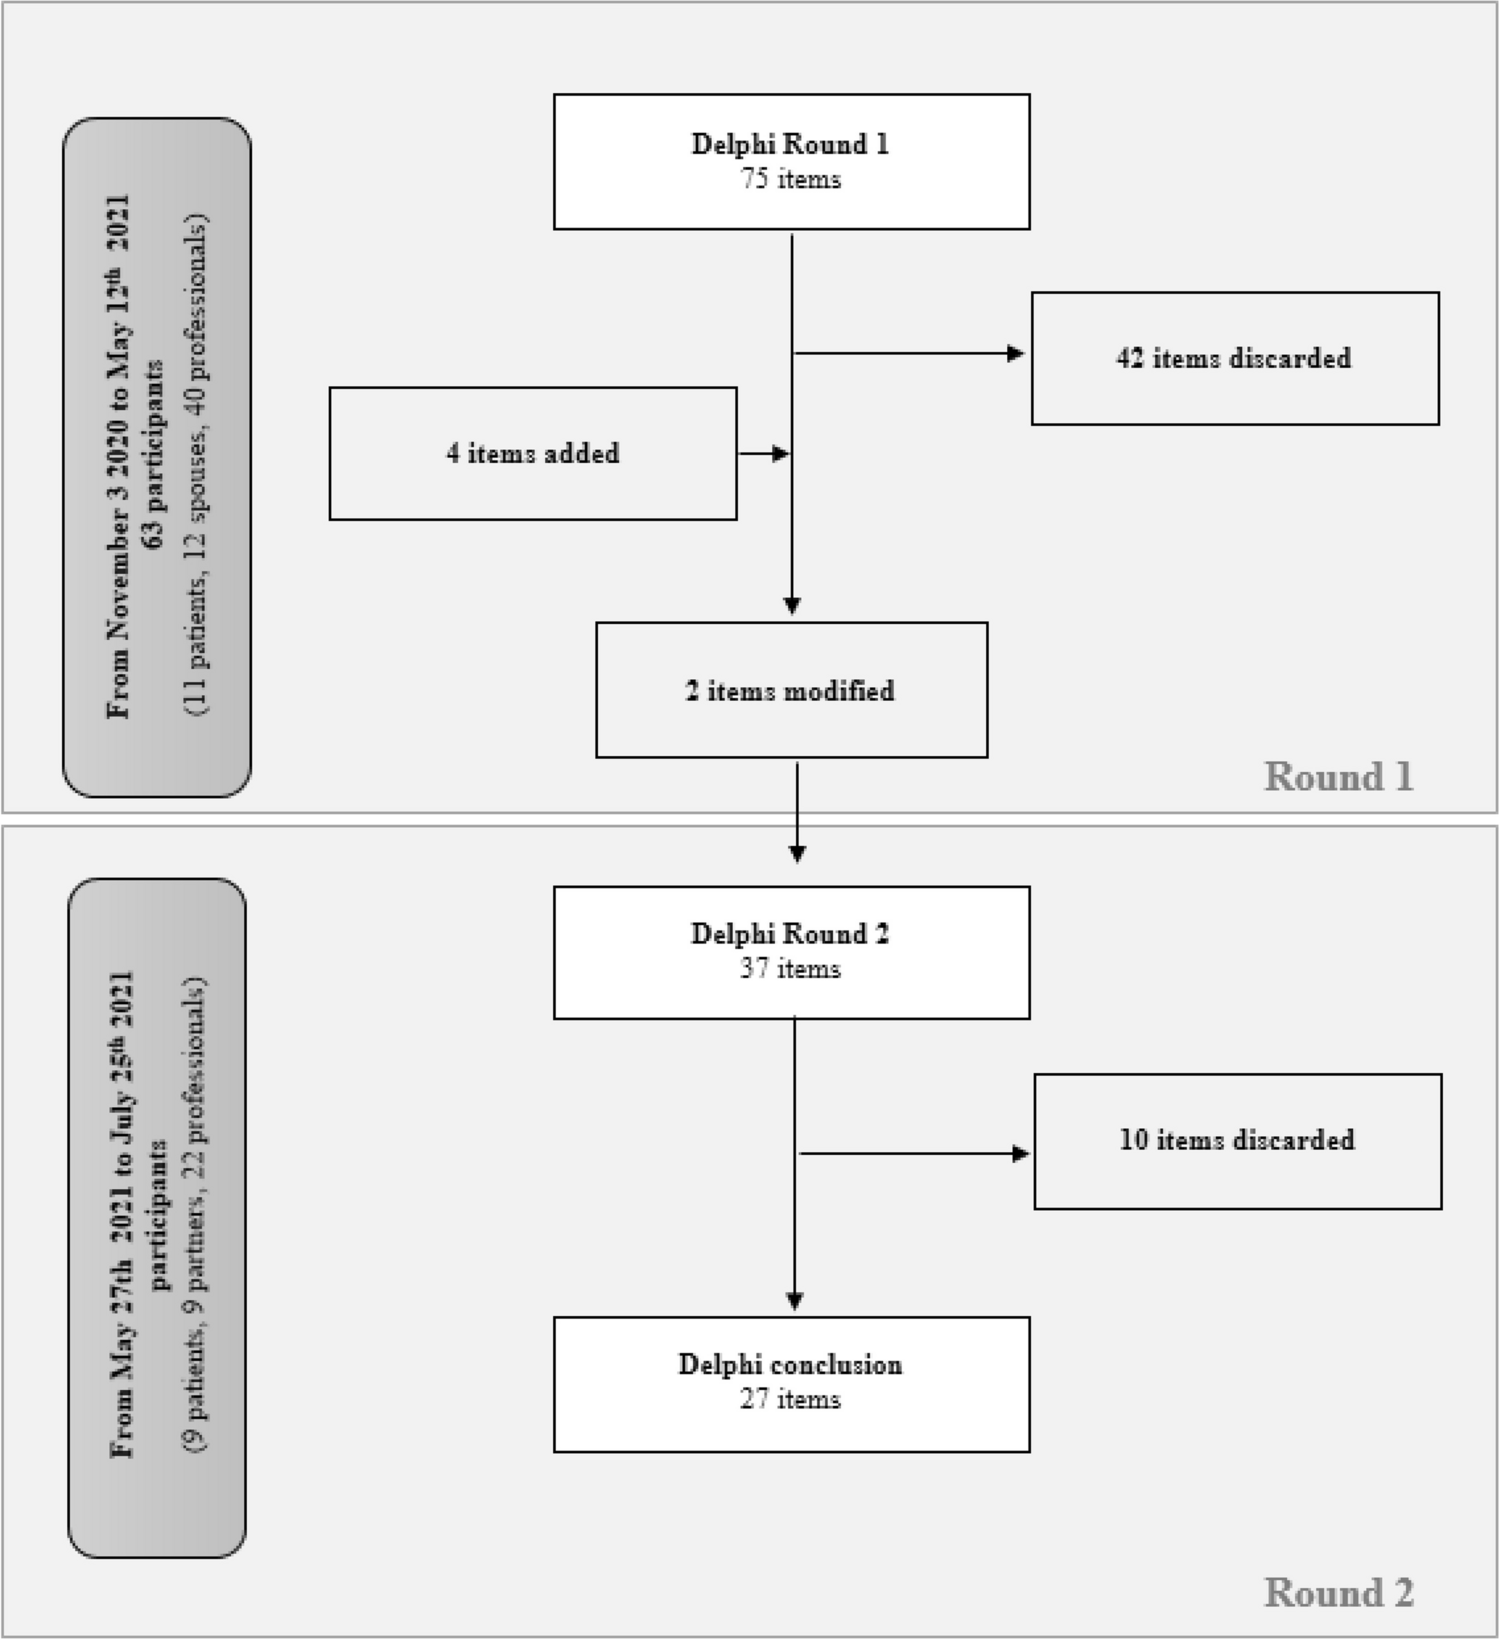 Spouses of patients treated for colon cancer: identification of key caregiver skills using the Delphi method